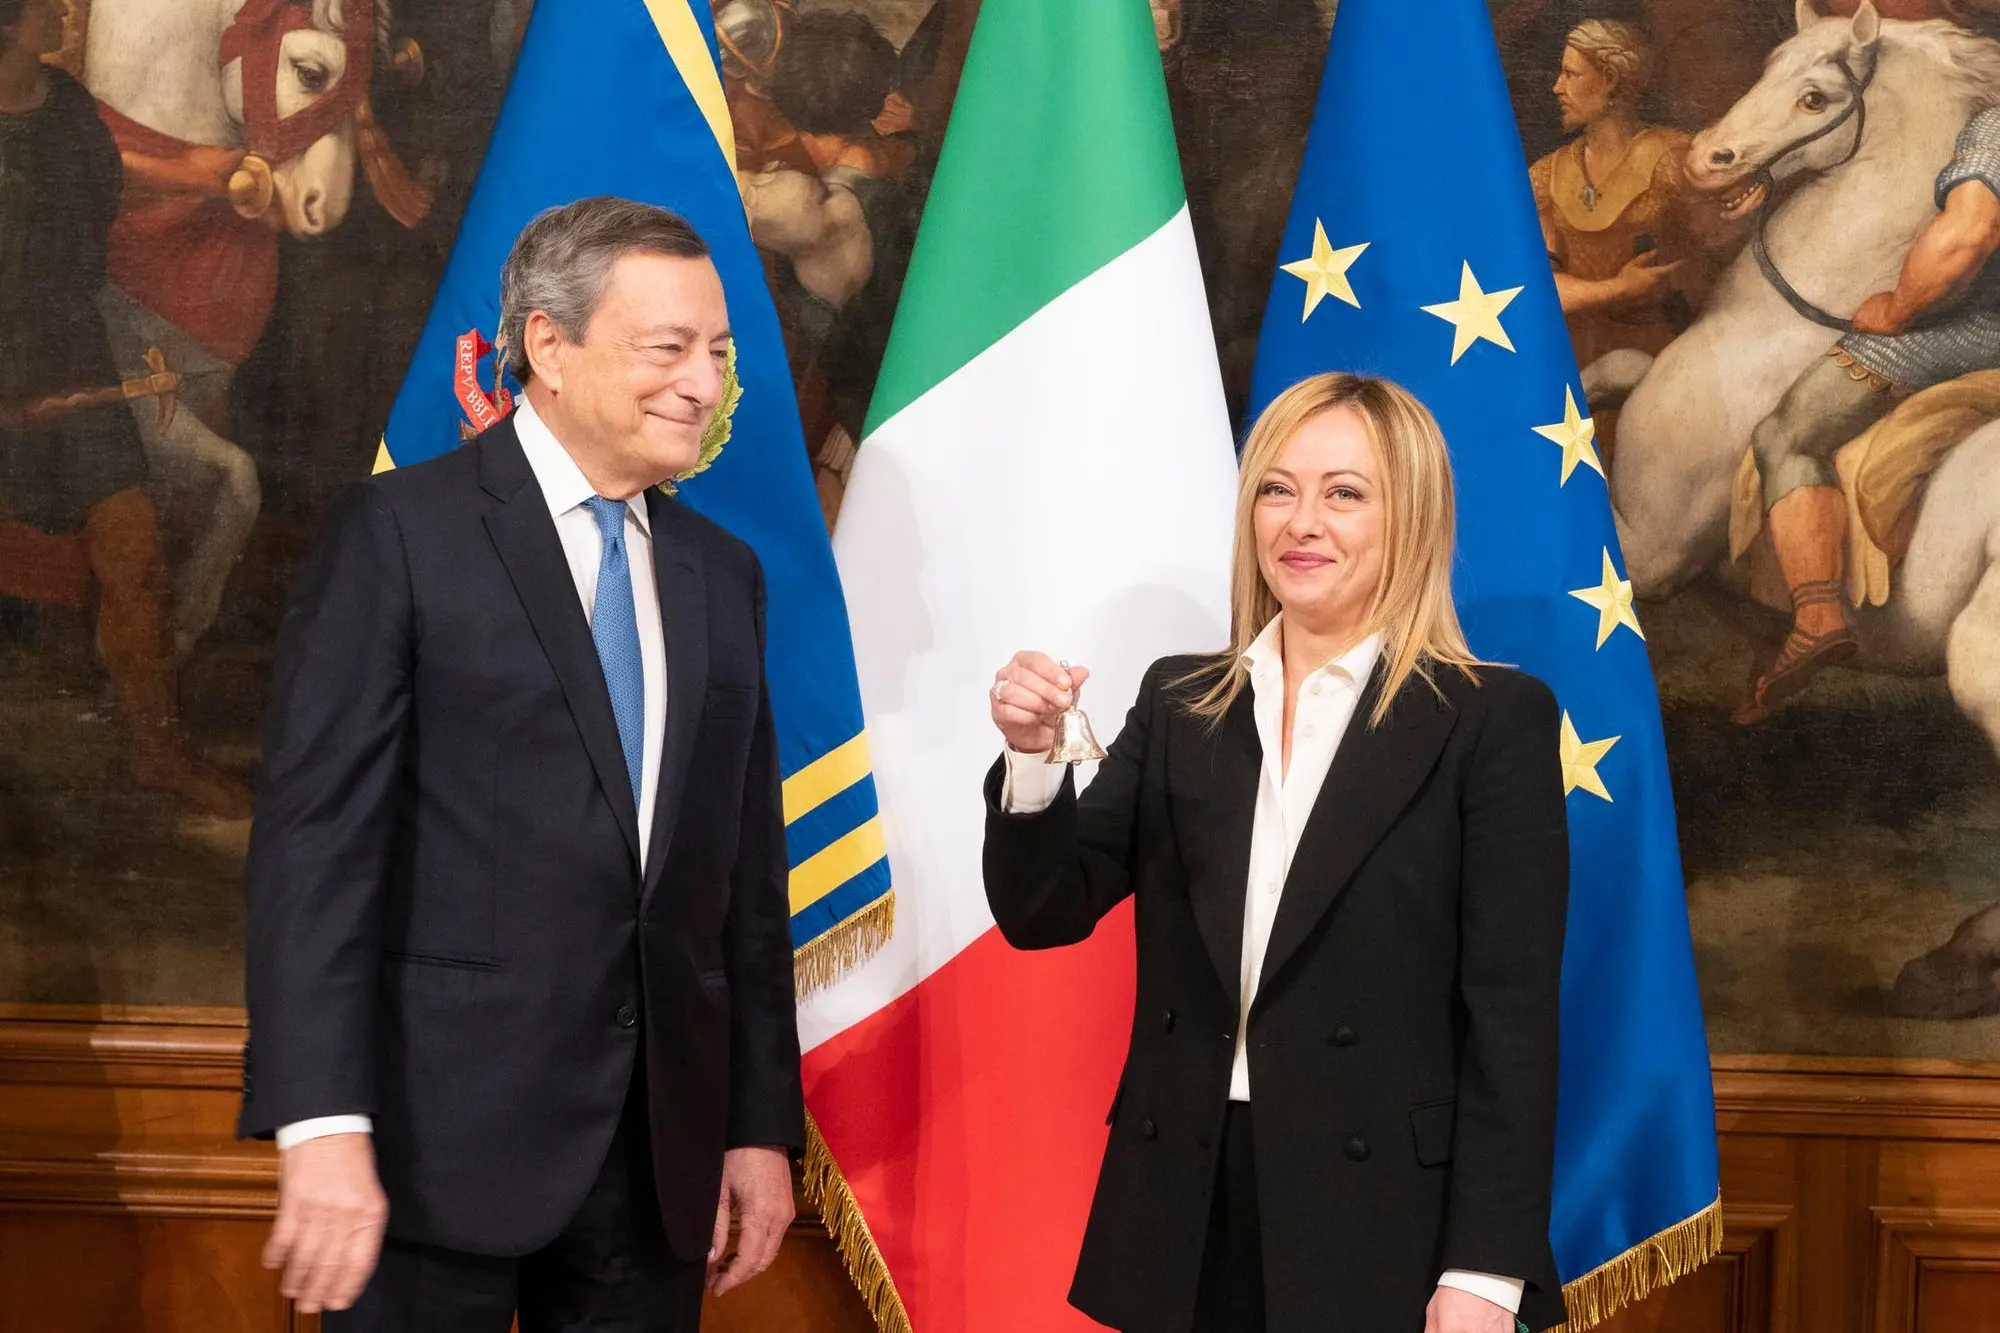 This handout picture, provided by Chigi Palace Press Office, shows Italy's outgoing Prime Minister Mario Draghi (L) hands over the bell used by the cabinet President to manage cabinet debates to Prime Minister, Giorgia Meloni (R), during the handover ceremony at Chigi Palace in Rome, Italy, 23 October 2022. Newly elected Prime Minister, Giorgia Meloni, and her cabinet were sworn in on 22 October. NPK ANSA / Filippo Attili - Chigi Palace Press Office handout +++ ANSA PROVIDES ACCESS TO THIS HANDOUT PHOTO TO BE USED SOLELY TO ILLUSTRATE NEWS REPORTING OR COMMENTARY ON THE FACTS OR EVENTS DEPICTED IN THIS IMAGE; NO ARCHIVING; NO LICENSING +++